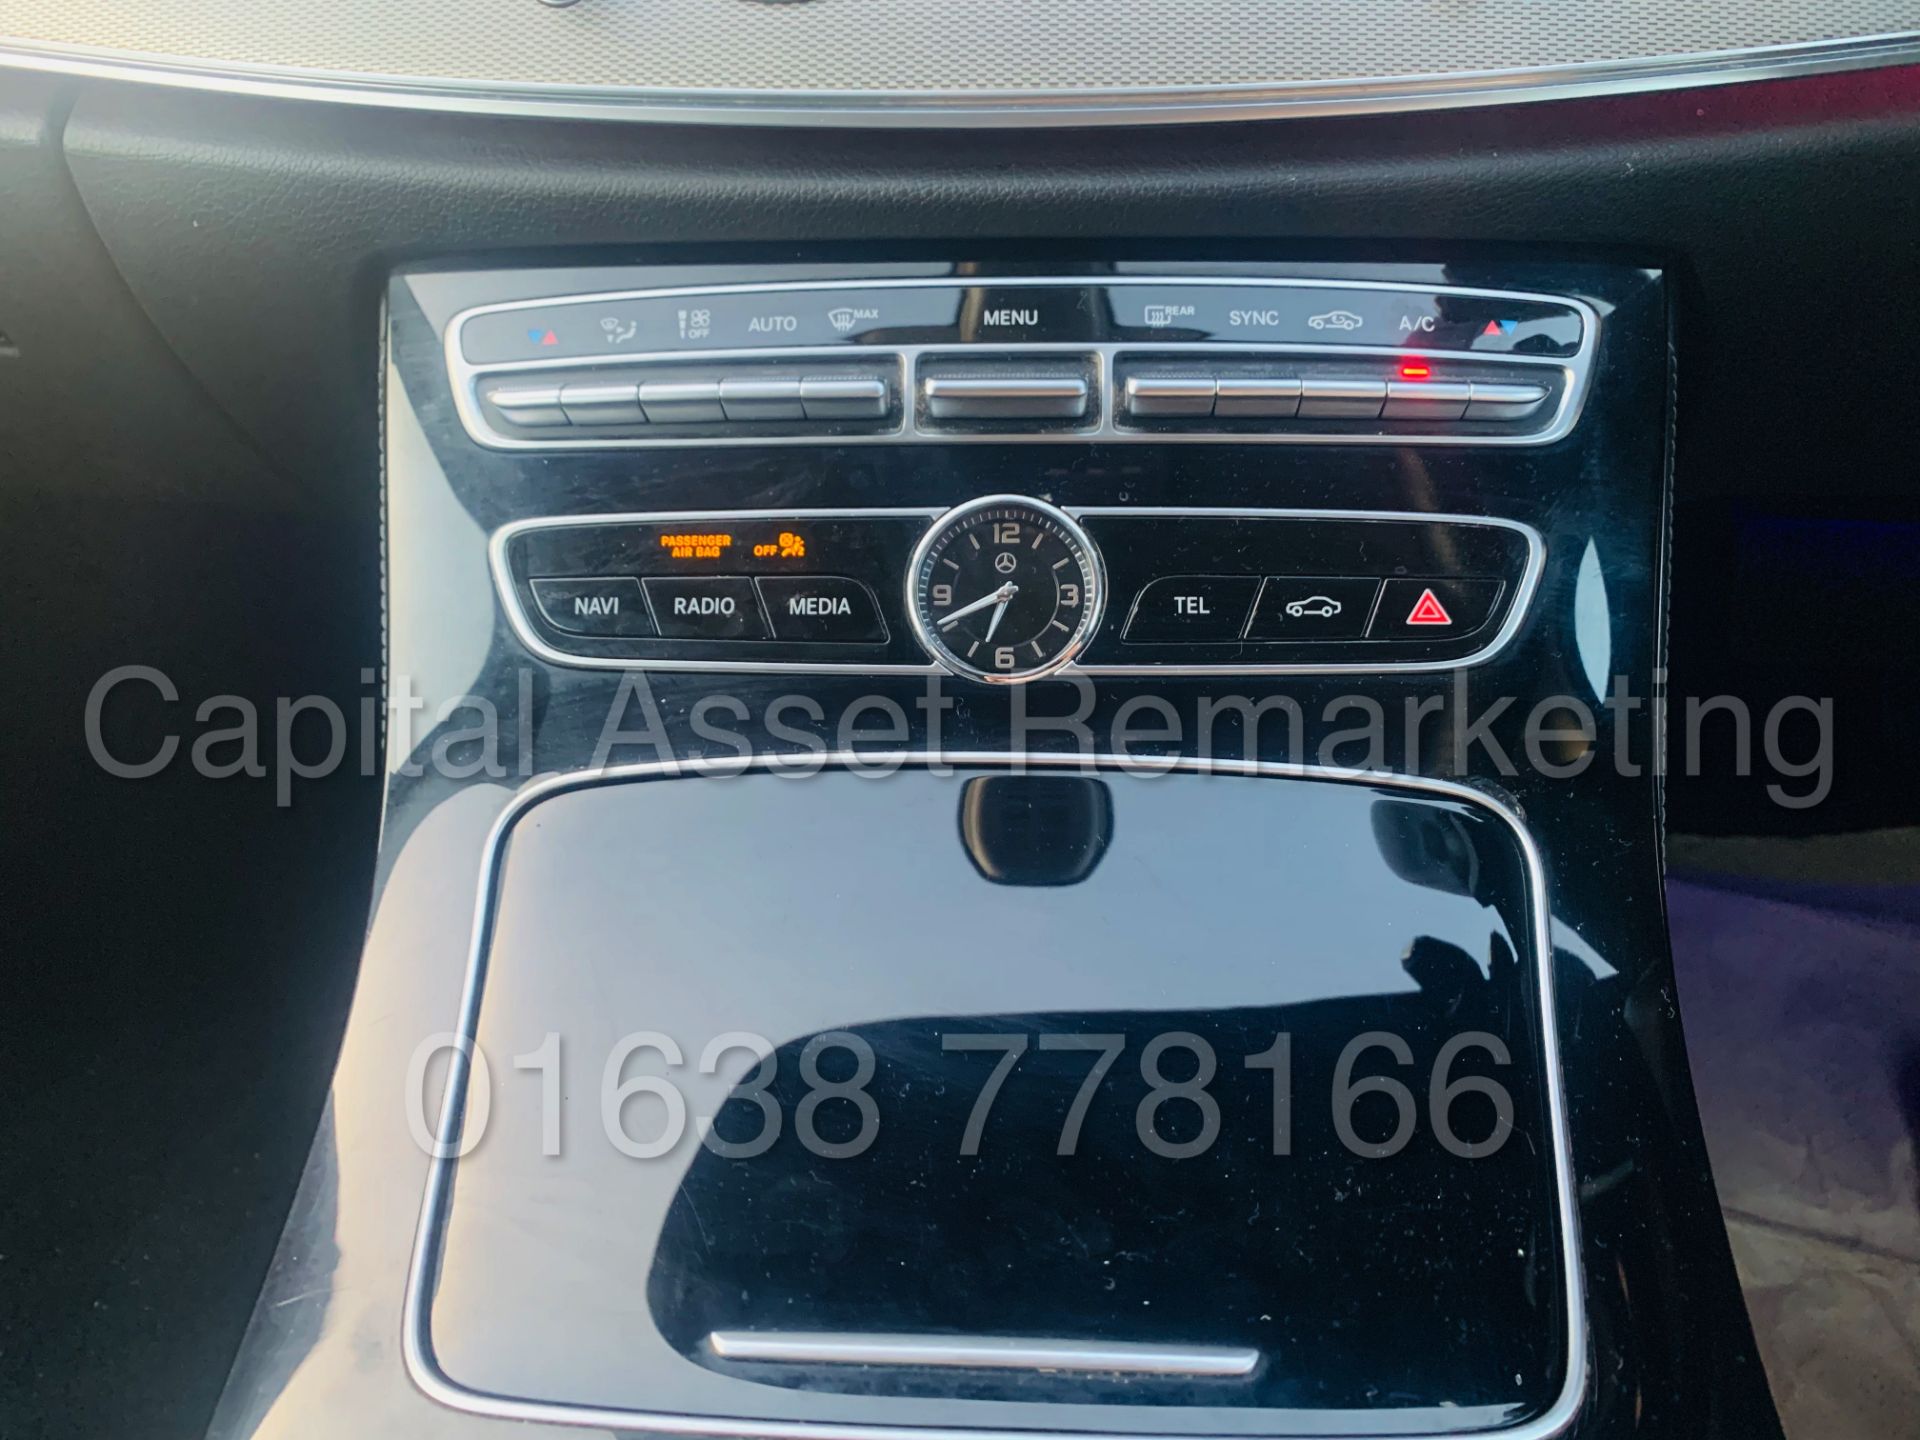 (On Sale) MERCEDES-BENZ E220D *SALOON* (2018 - NEW MODEL) '9-G TRONIC AUTO - LEATHER - SAT NAV' - Image 47 of 53